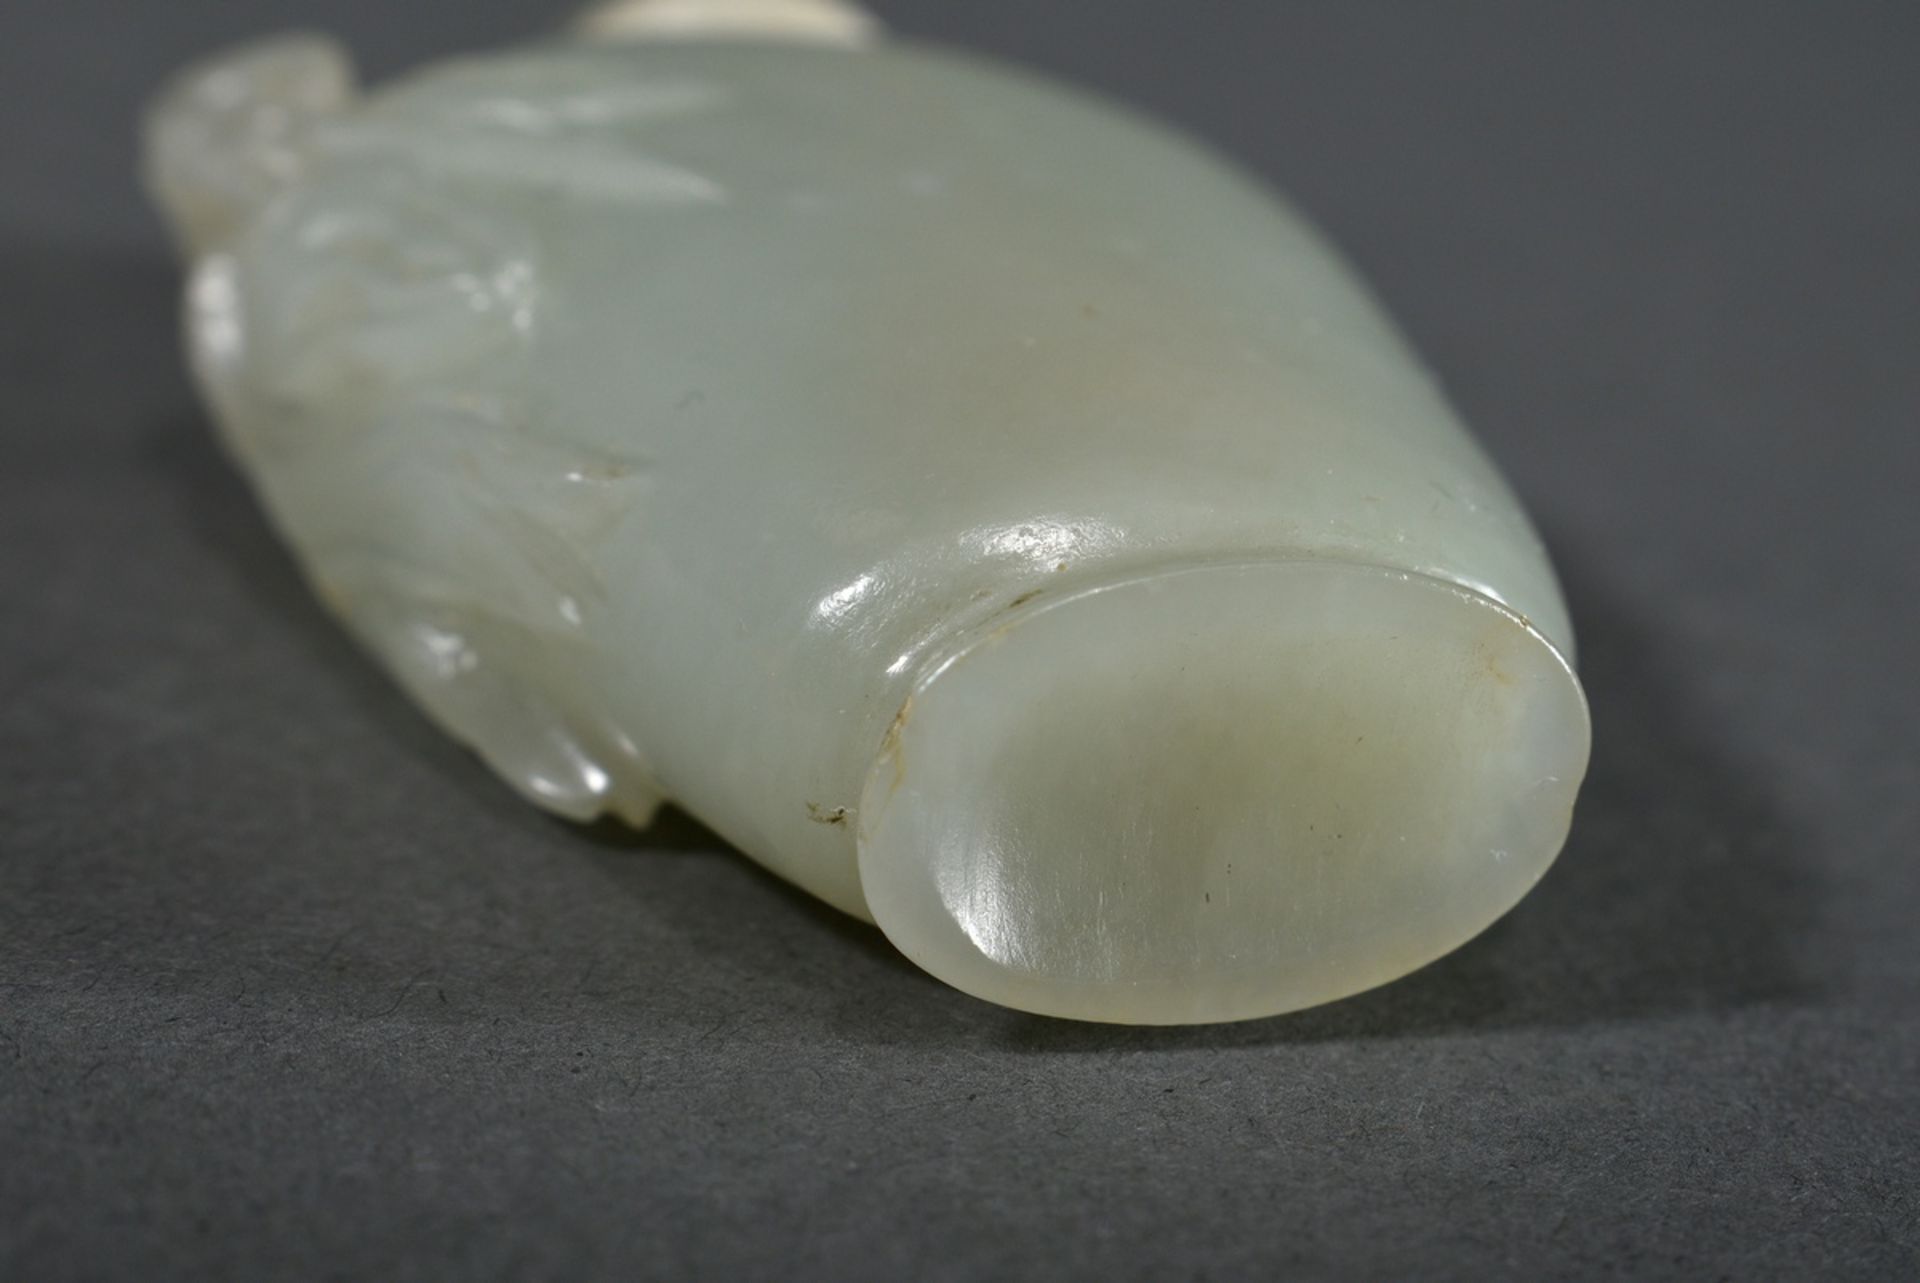 Seladon jade snuffbottle with "flower and leaf decoration" in high relief, China probably Qing dyna - Image 4 of 5